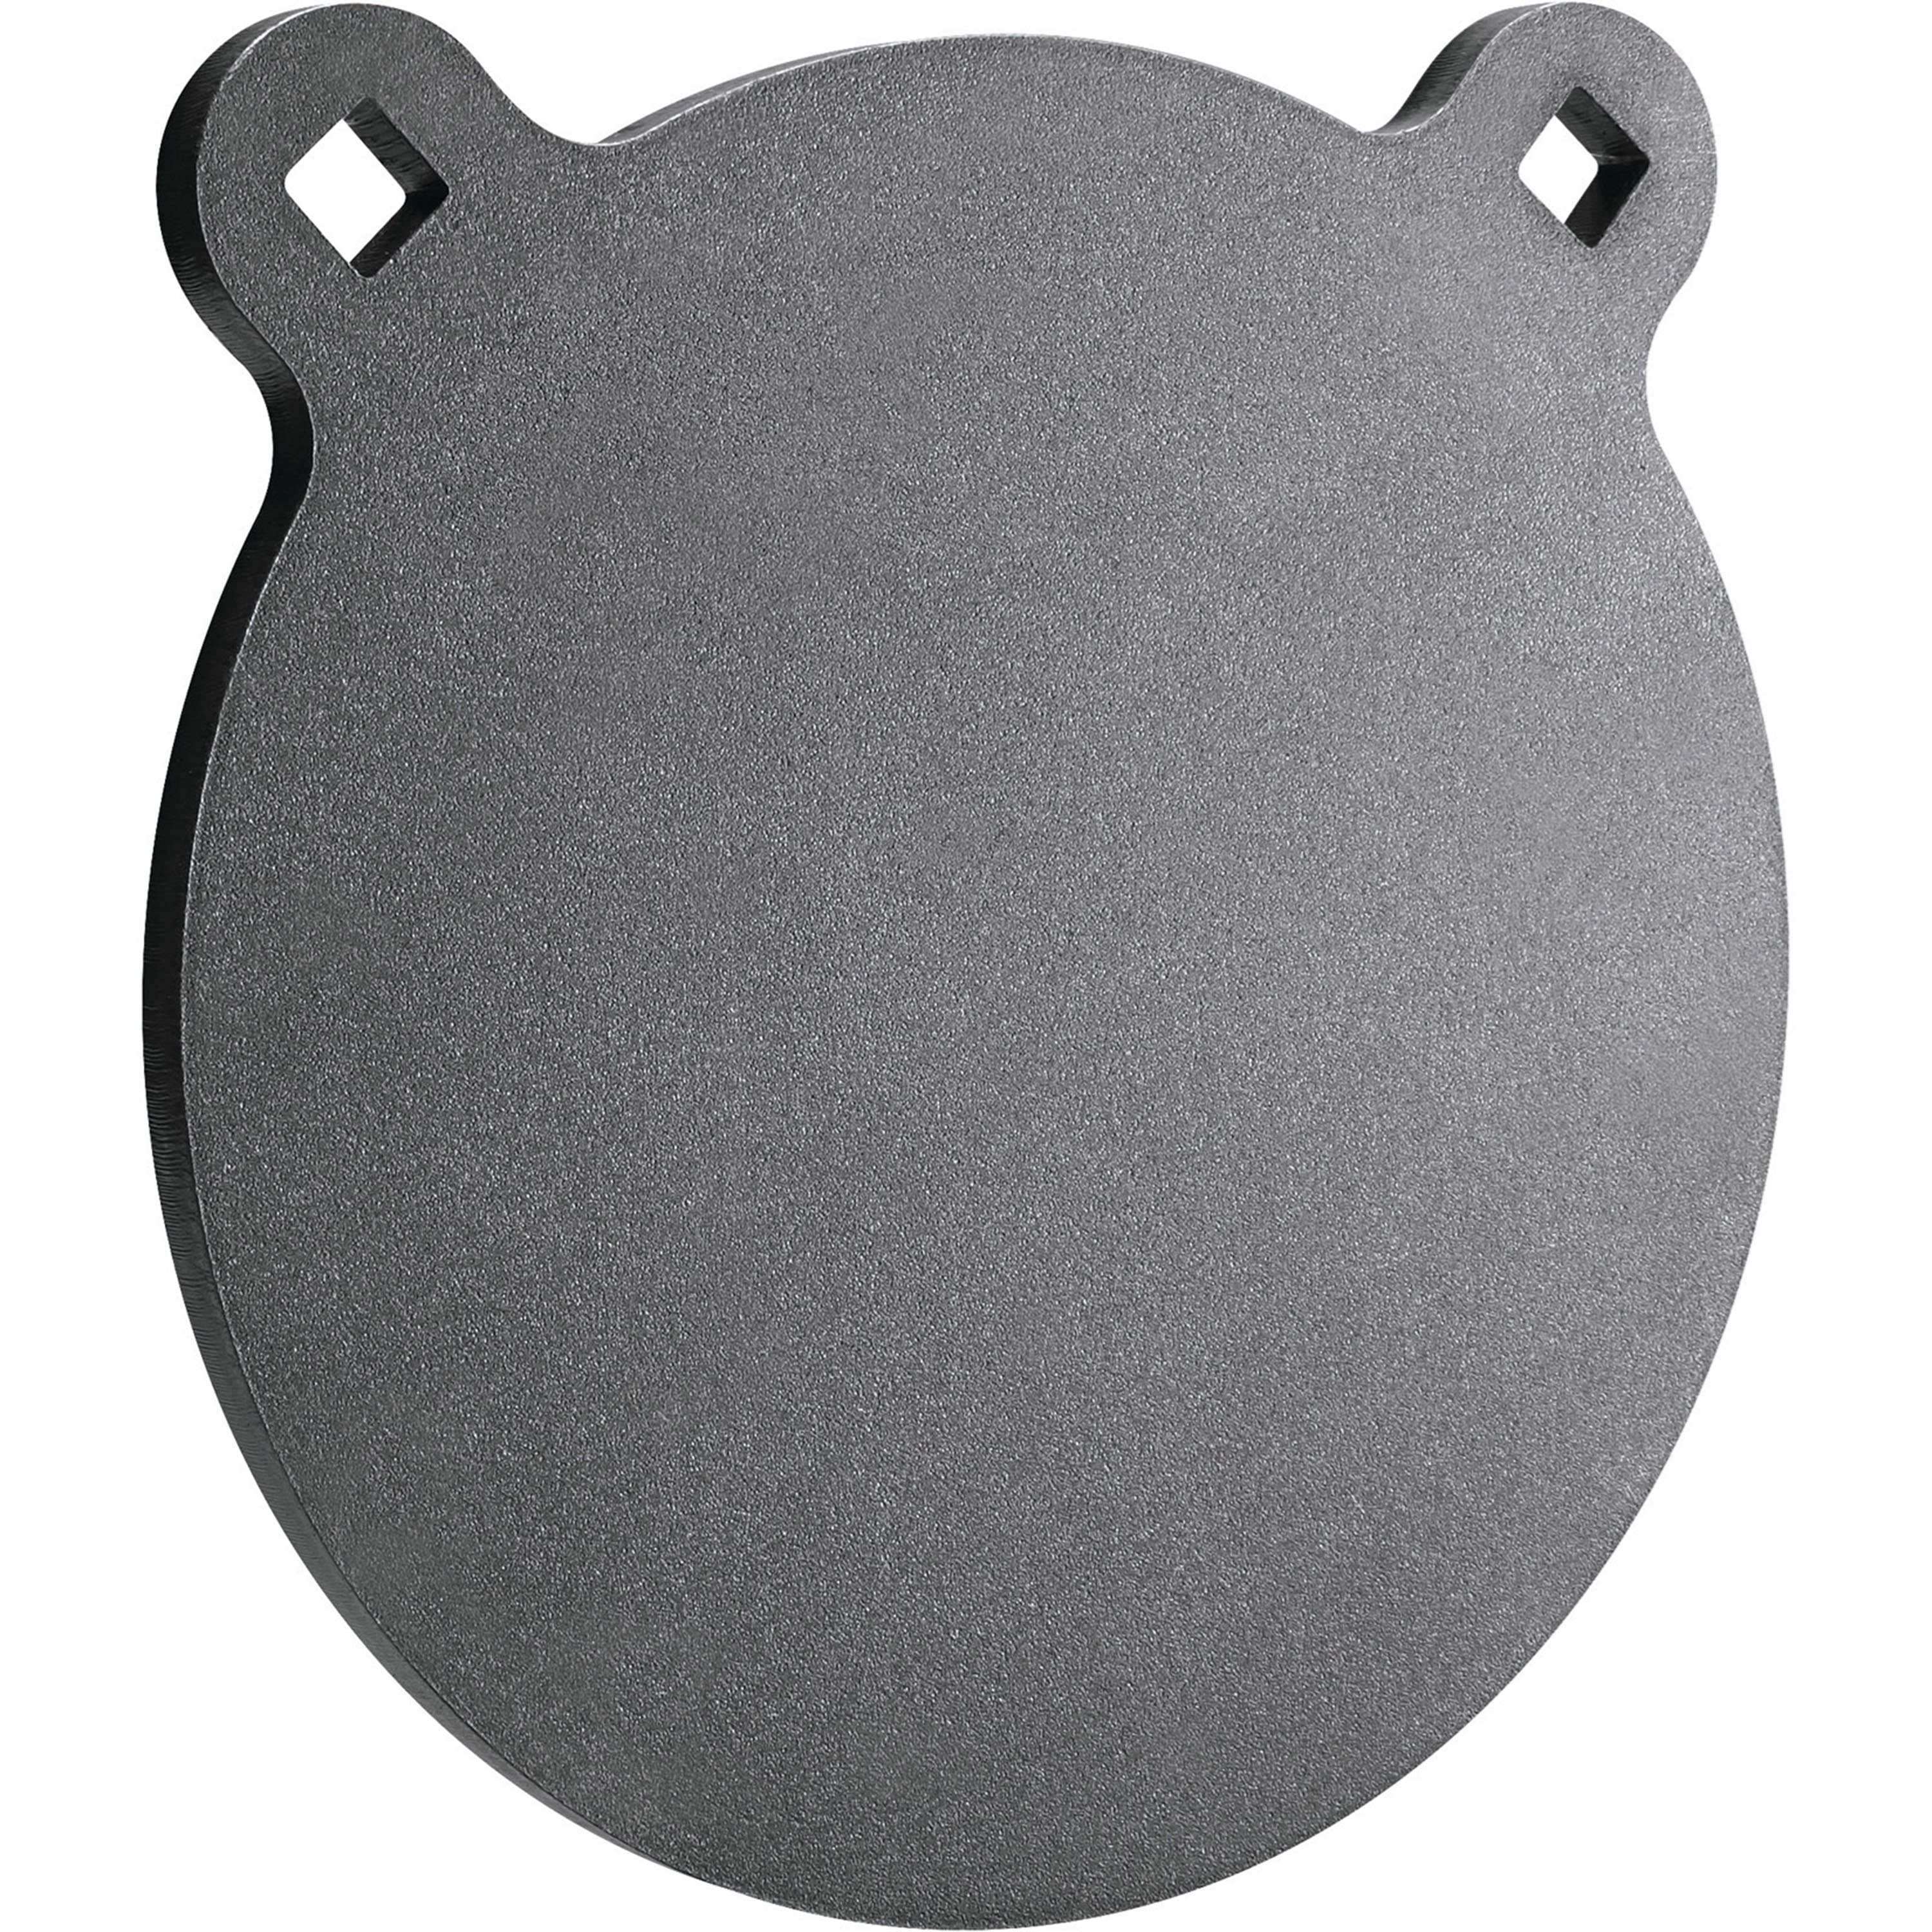 Steel Target Practice Plate 1ct 1/2" AR500 4" x 4" Gong High Caliber 